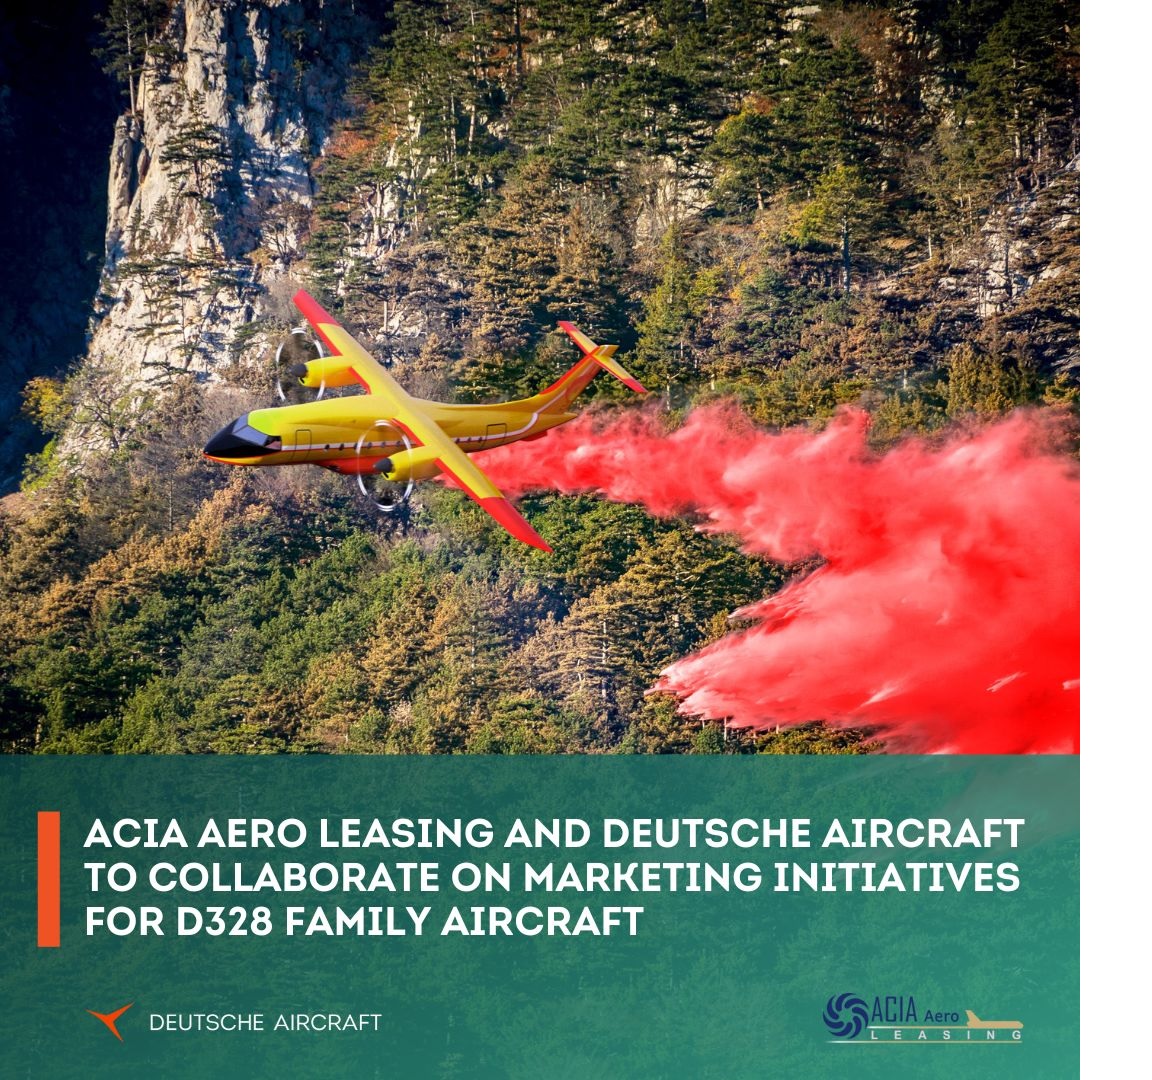 Deutsche Aircraft to collaborate with ACIA Aero Leasing on D328 Aircraft